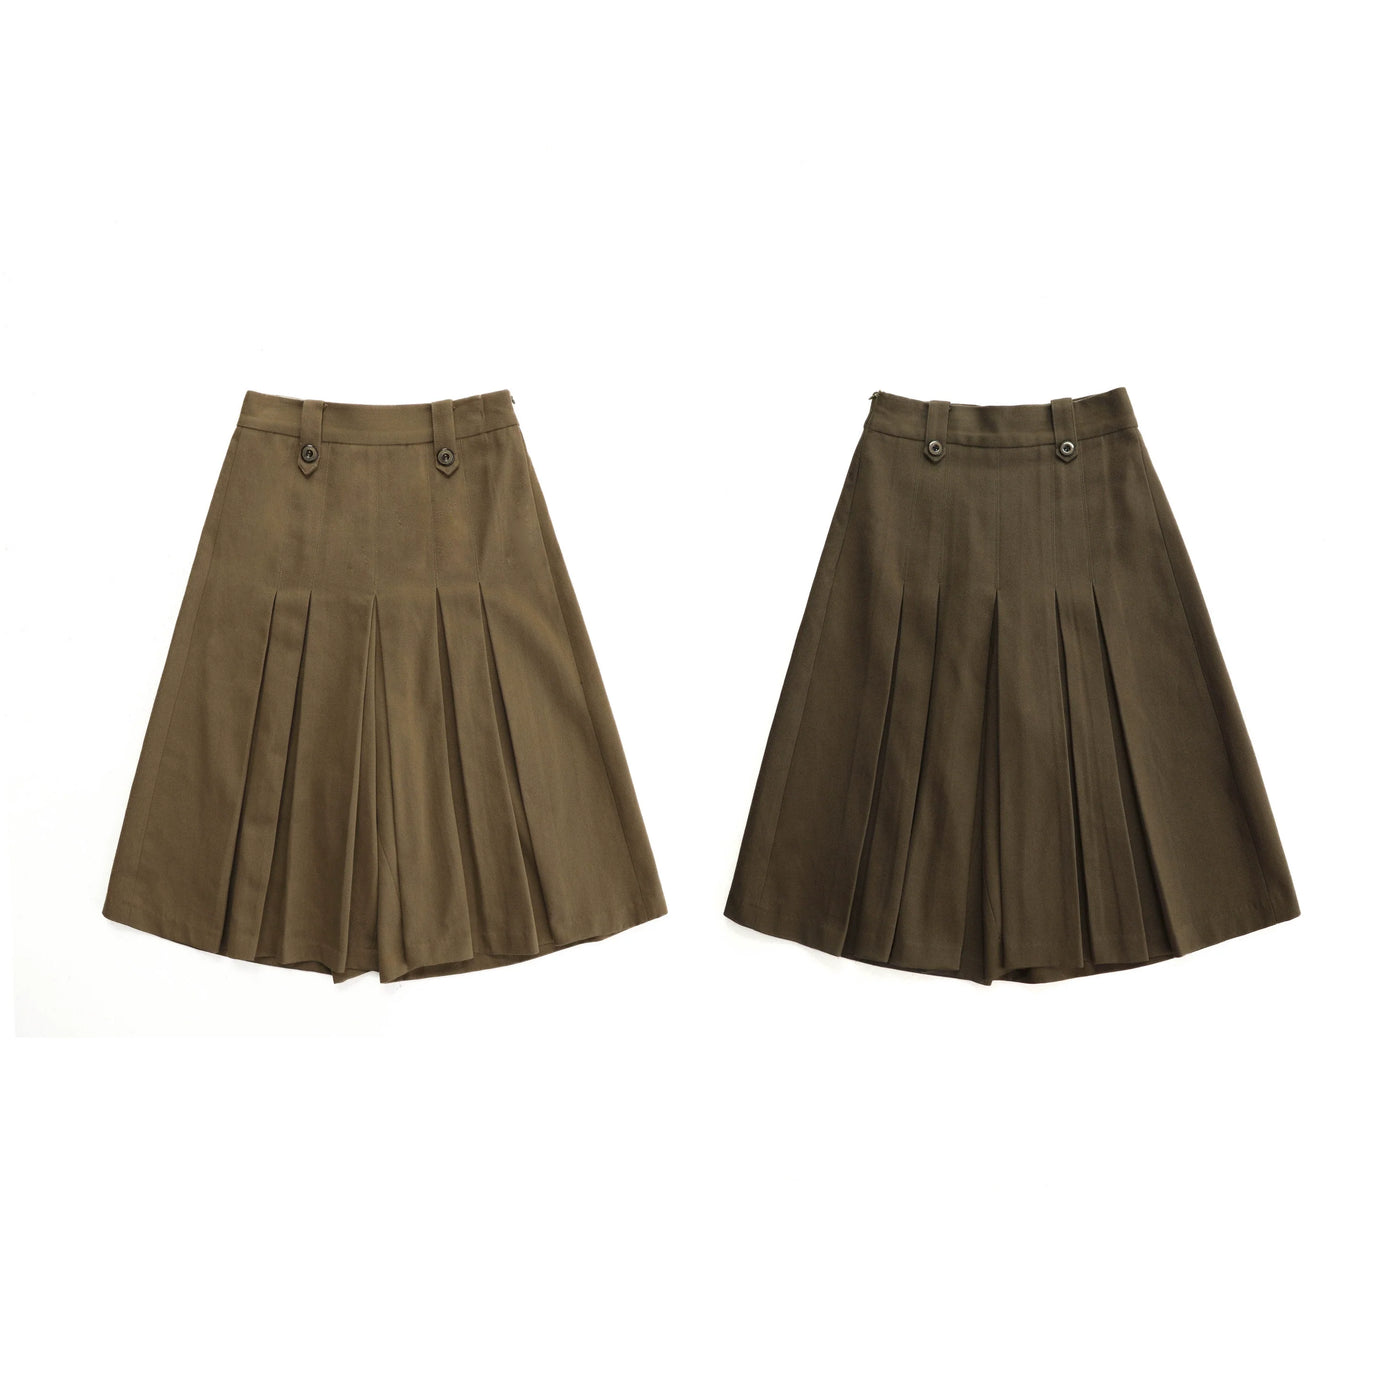 Pleated High Waisted Skirt Korean Street Fashion Skirt By Mason Prince Shop Online at OH Vault